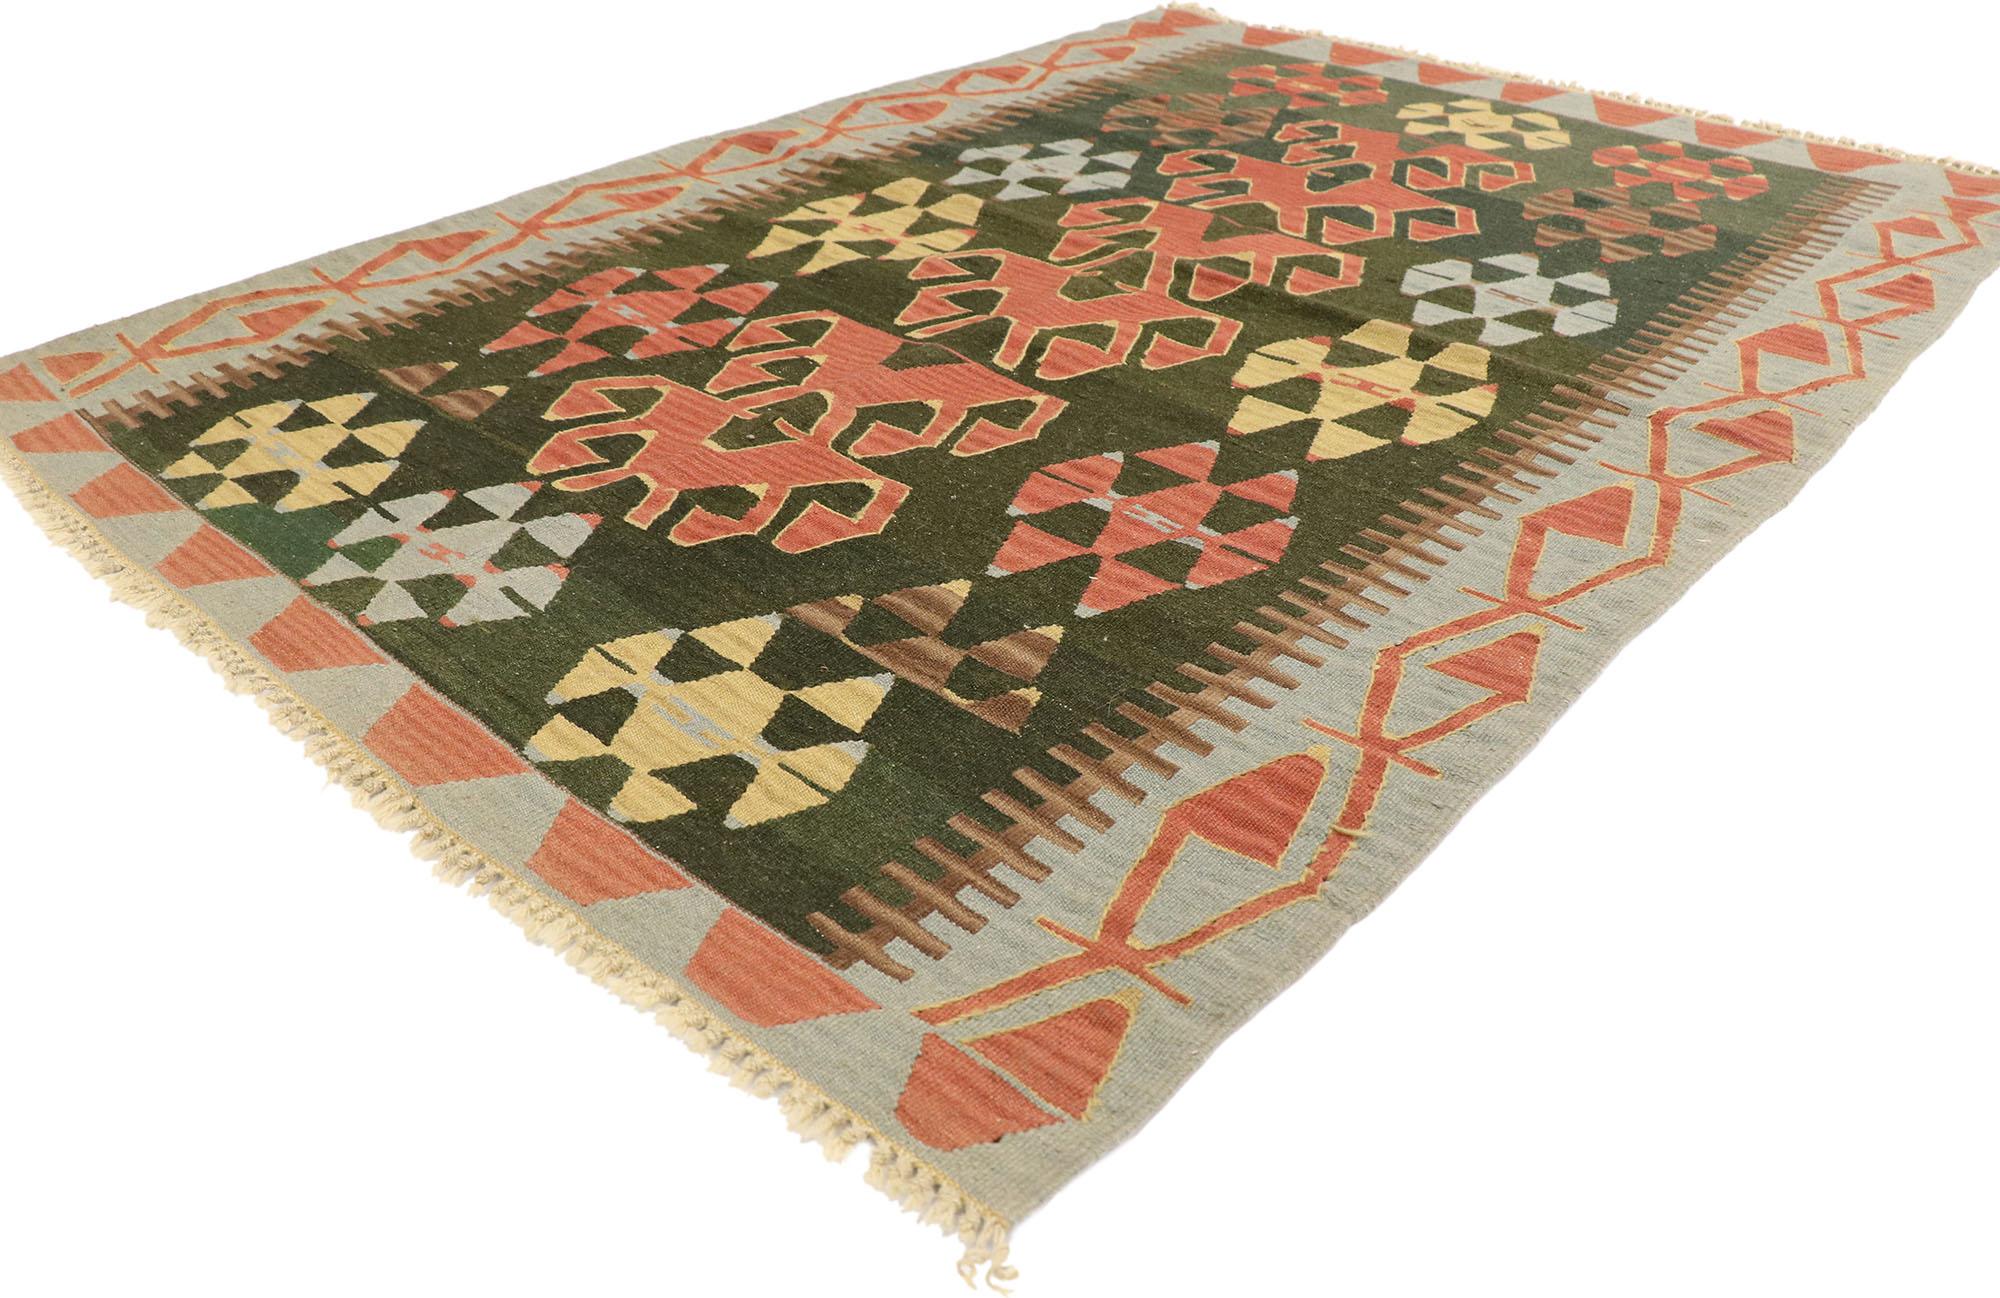 77995 Vintage Persian Shiraz Kilim rug with Tribal Style 04'01 x 05'10. Full of tiny details and a bold expressive design combined with vibrant colors and tribal style, this hand-woven wool vintage Persian Shiraz kilim rug is a captivating vision of